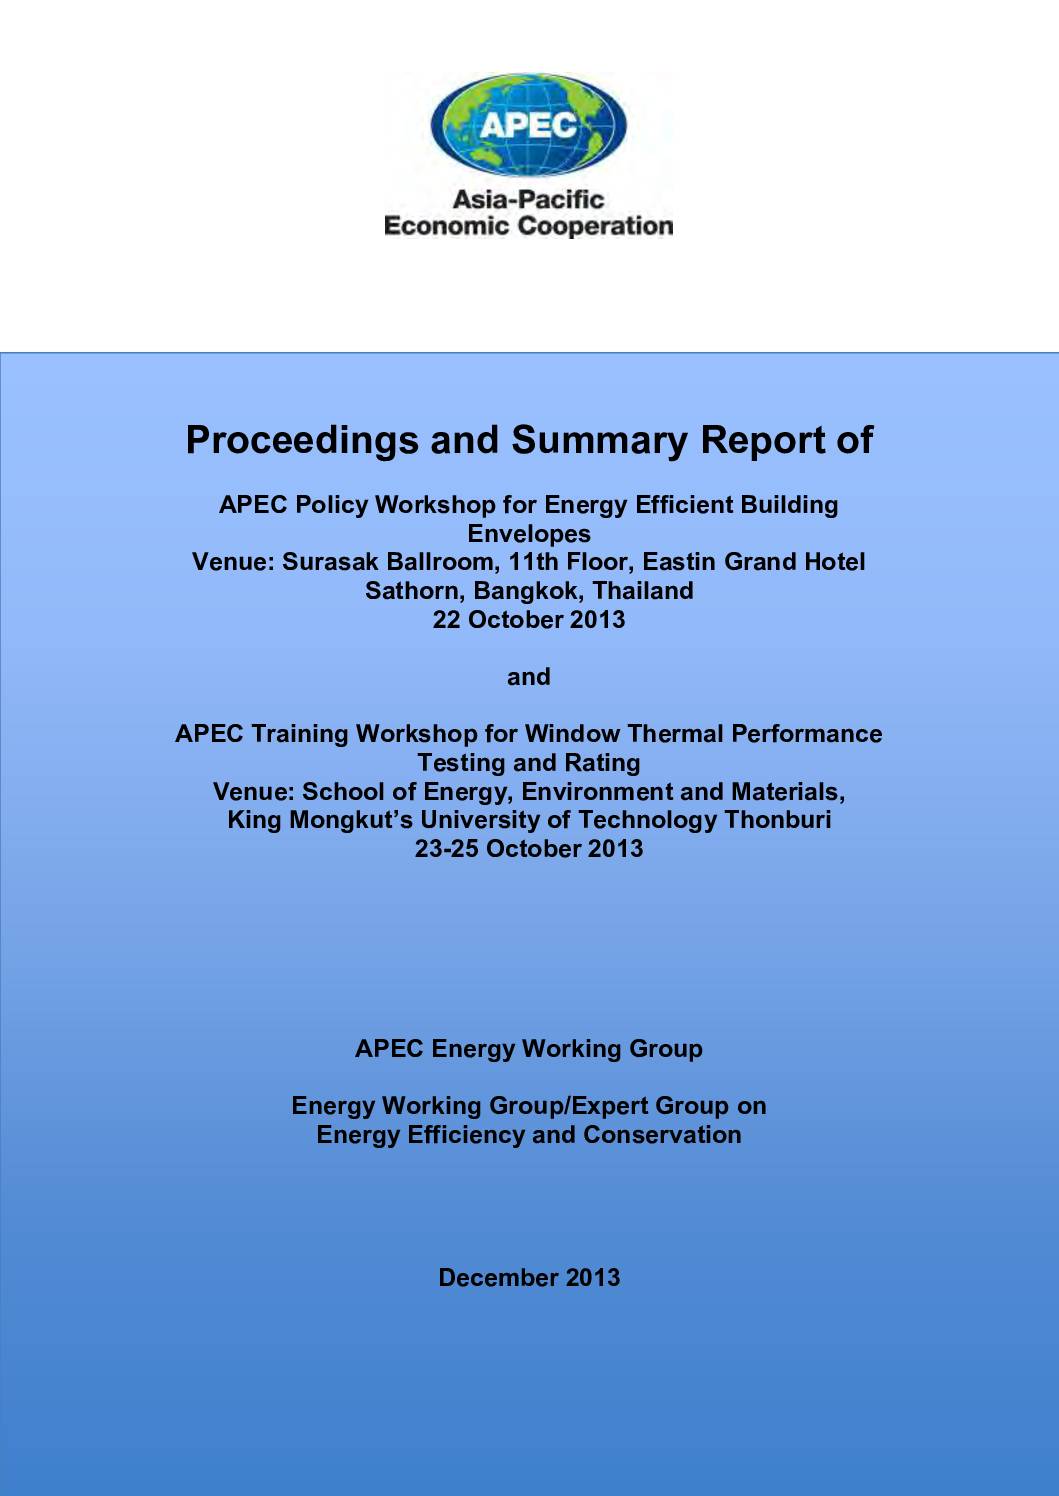 Proceedings and Summary Report of two events: APEC Policy Workshop for Energy Efficient Building Envelopes and APEC Training Workshop for Window Thermal Performance Testing and Rating